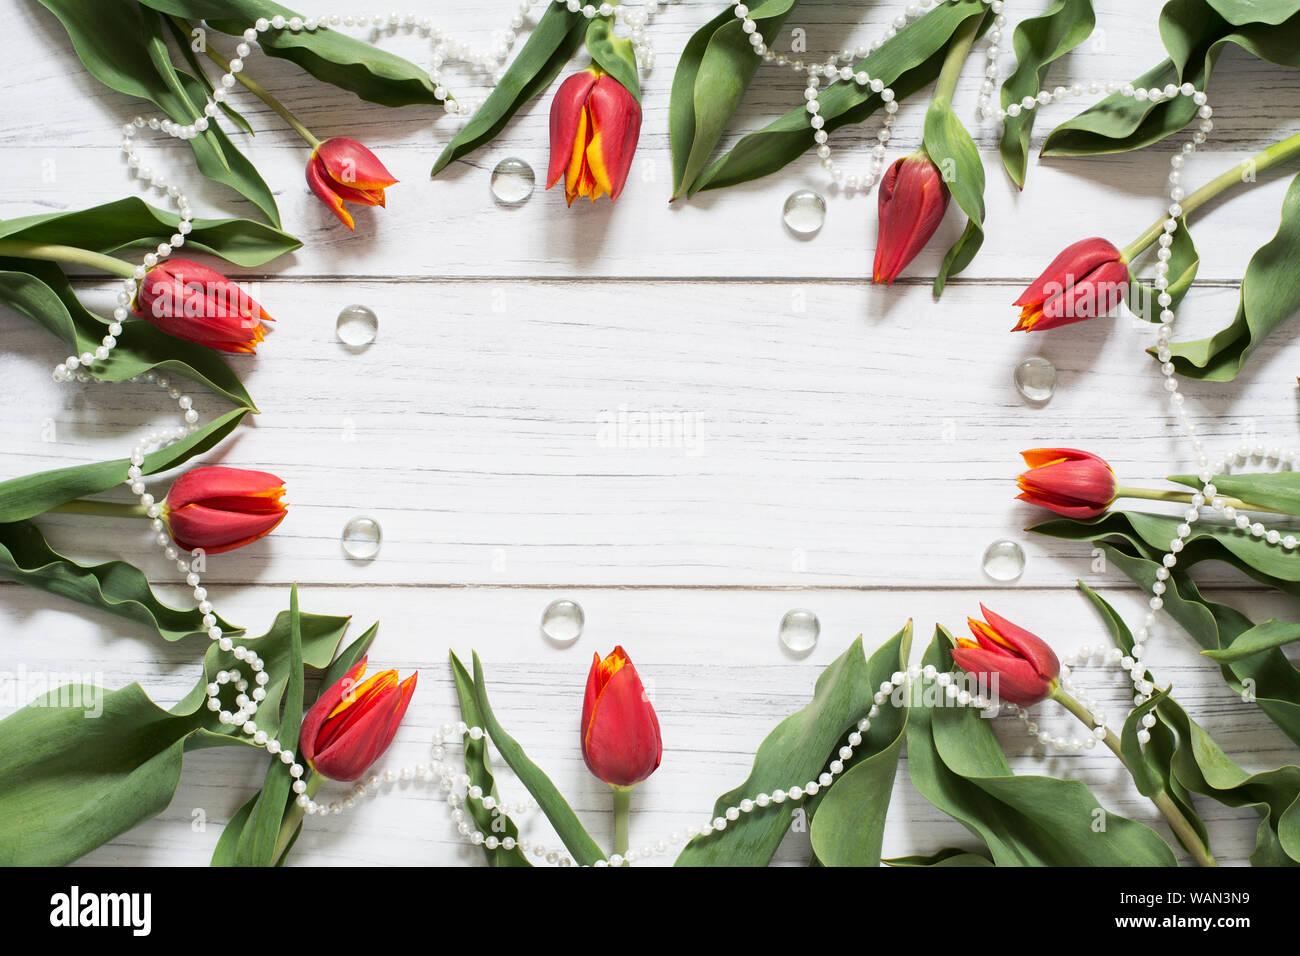 Spring border with red tulips, white bead chain and glass stones arranged in a circle on white wooden background Stock Photo